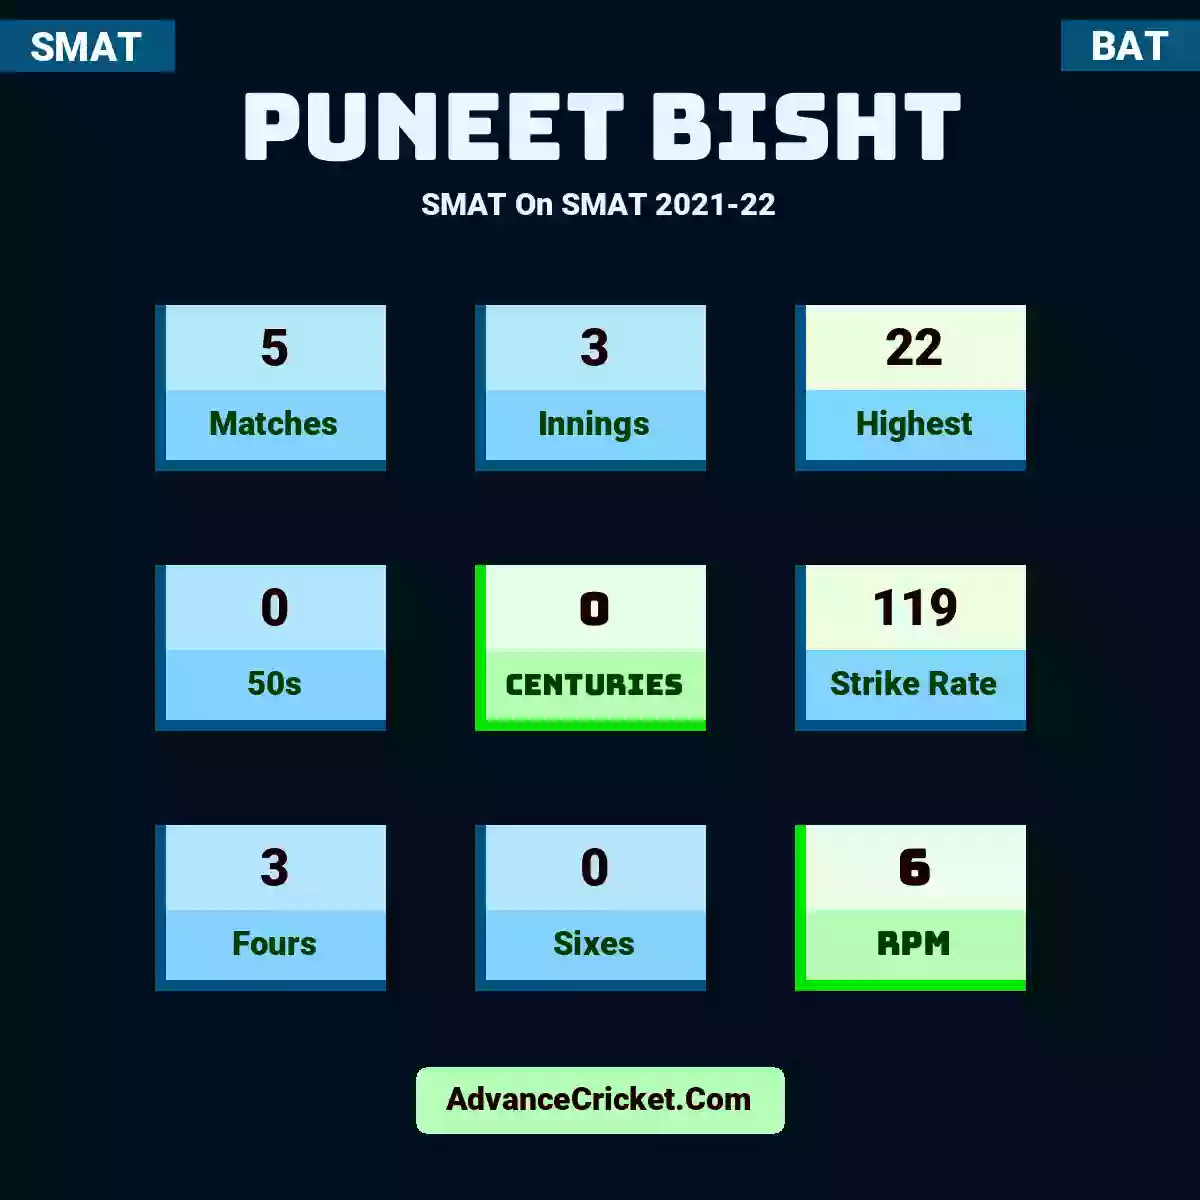 Puneet Bisht SMAT  On SMAT 2021-22, Puneet Bisht played 5 matches, scored 22 runs as highest, 0 half-centuries, and 0 centuries, with a strike rate of 119. P.Bisht hit 3 fours and 0 sixes, with an RPM of 6.